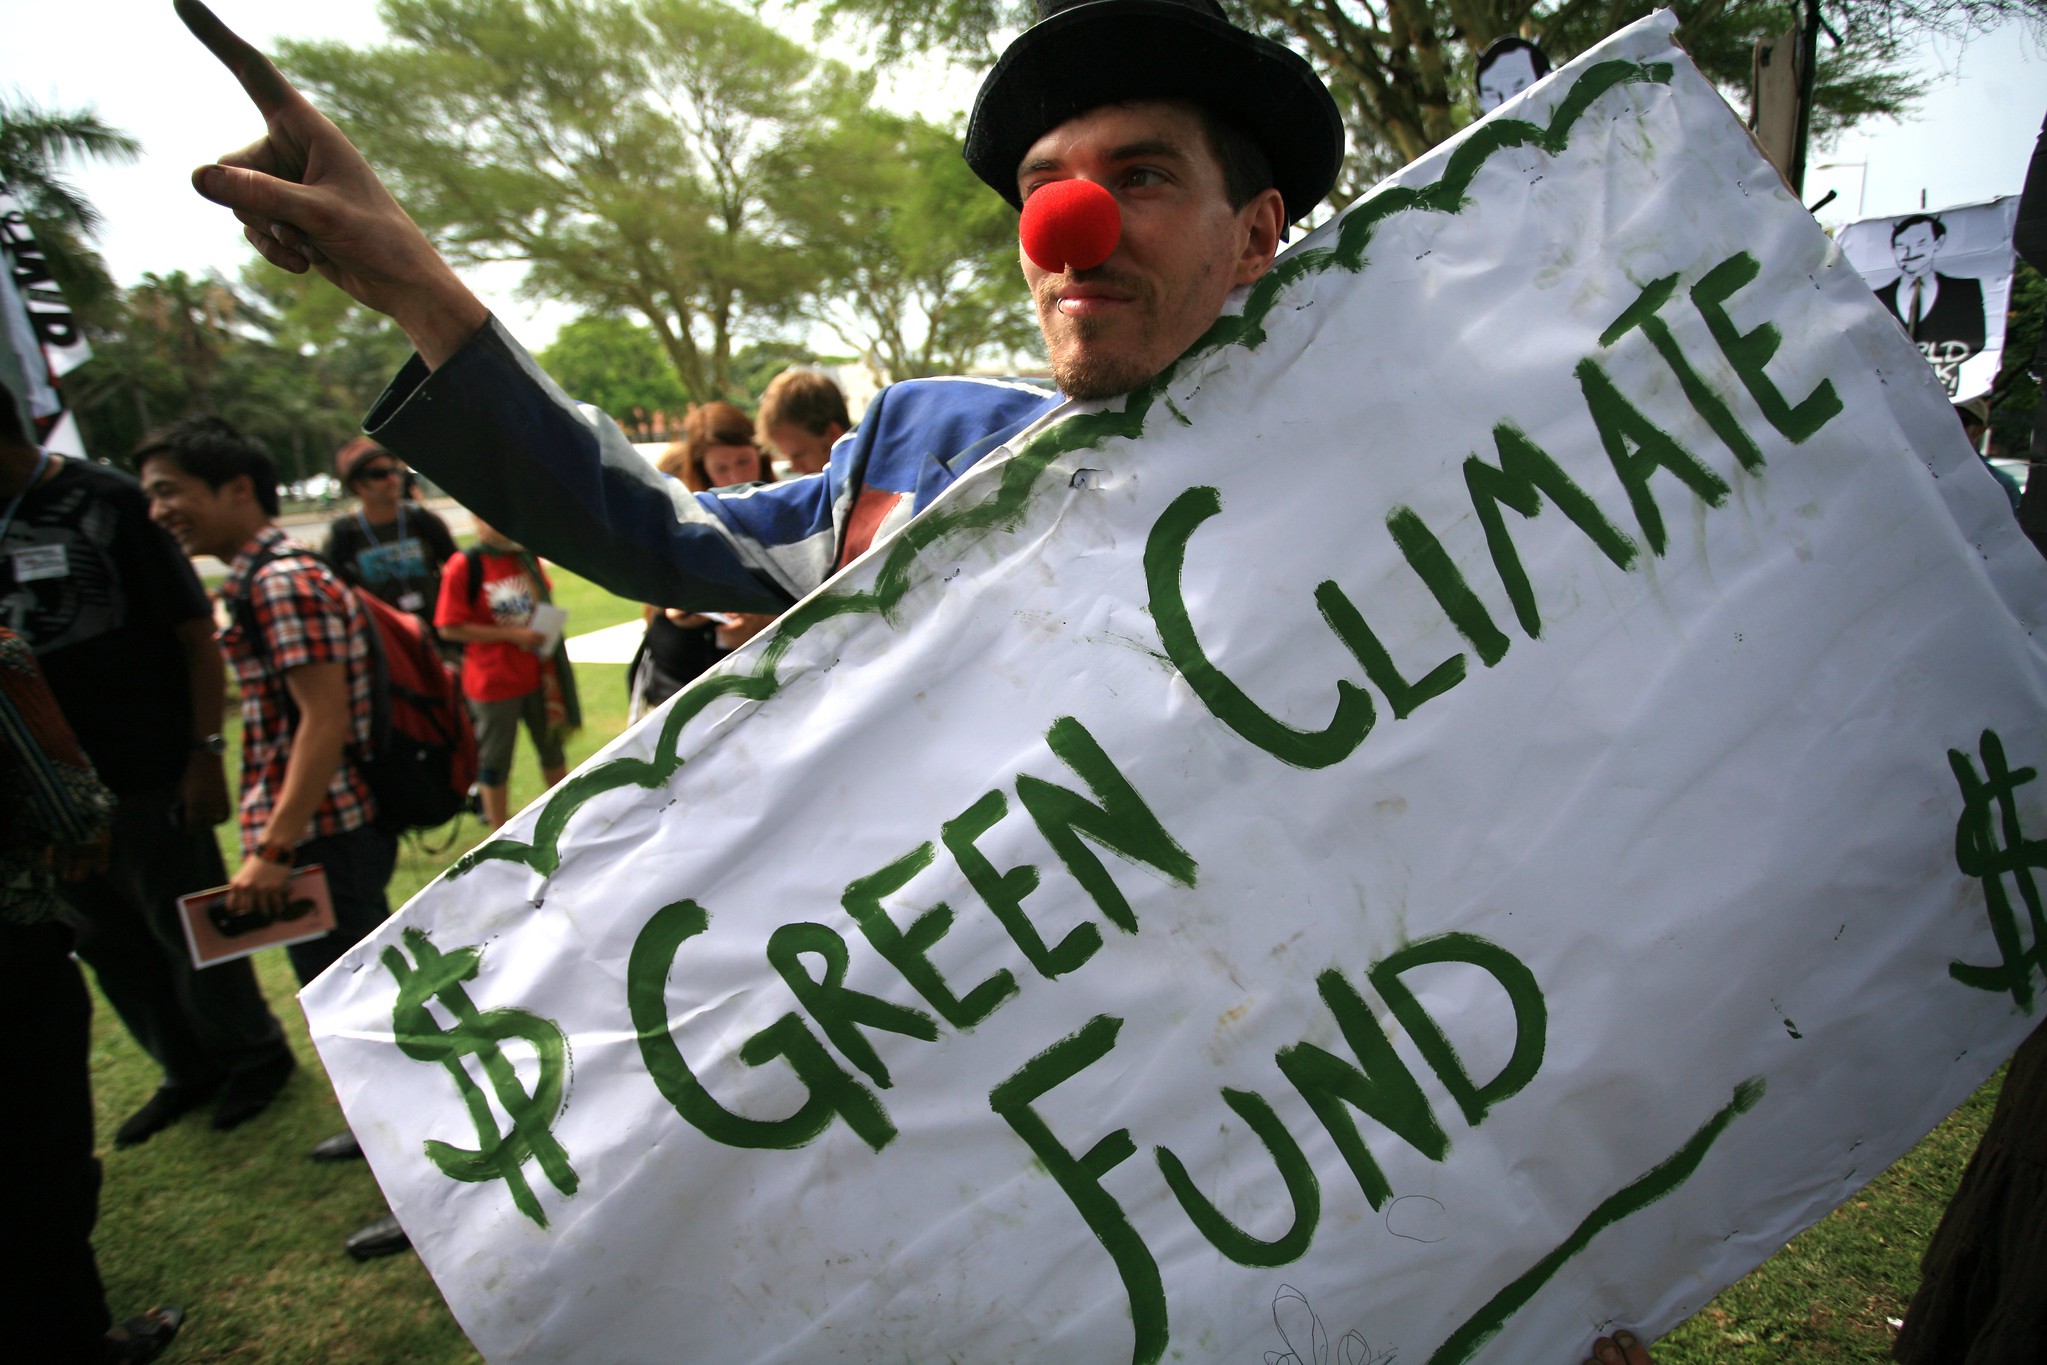 Green Climate Fund rally with man holding banner